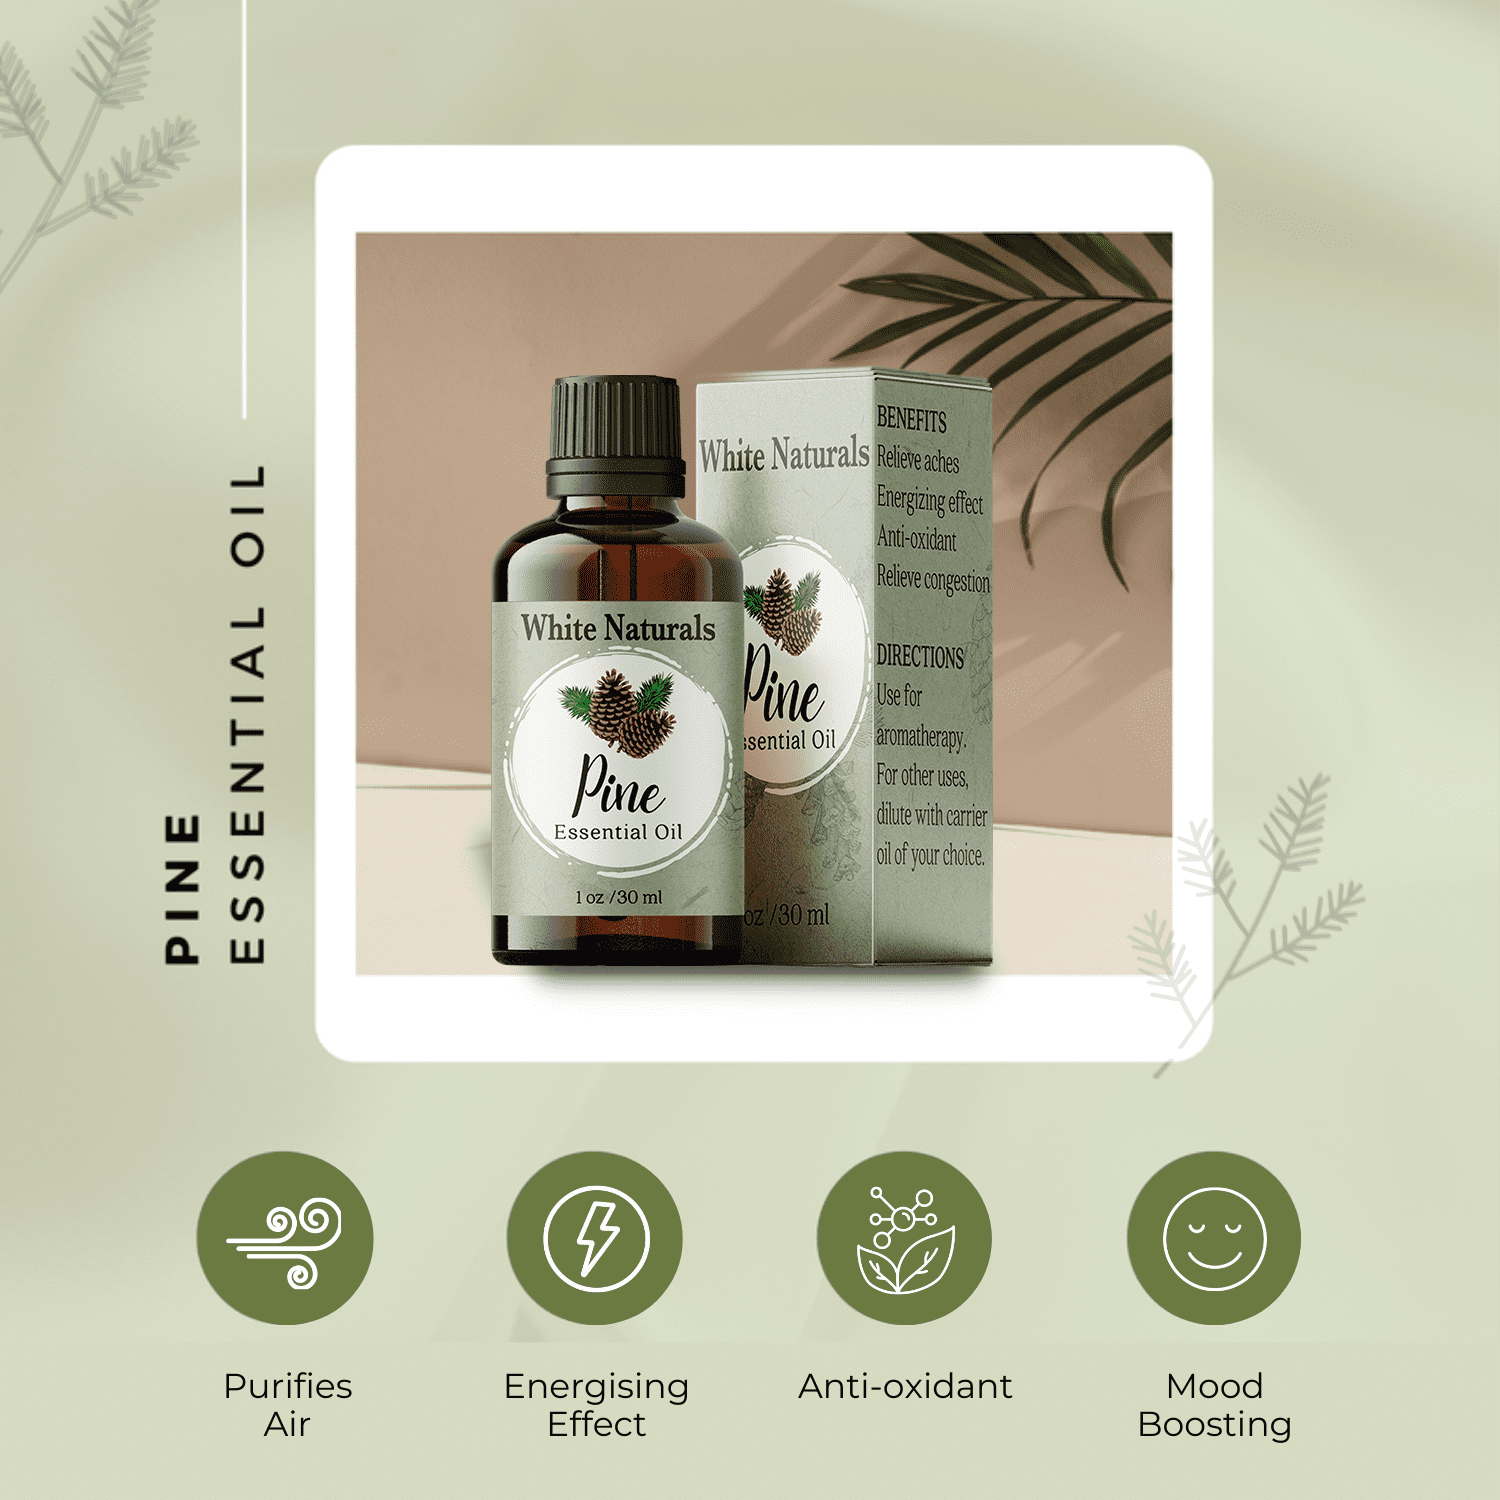 Pine Essential Oil 5ml by Young Living Essential Oils - Uplifting aroma -  Refreshing Breathing Experience - Repels the Influence of Negative Energy 